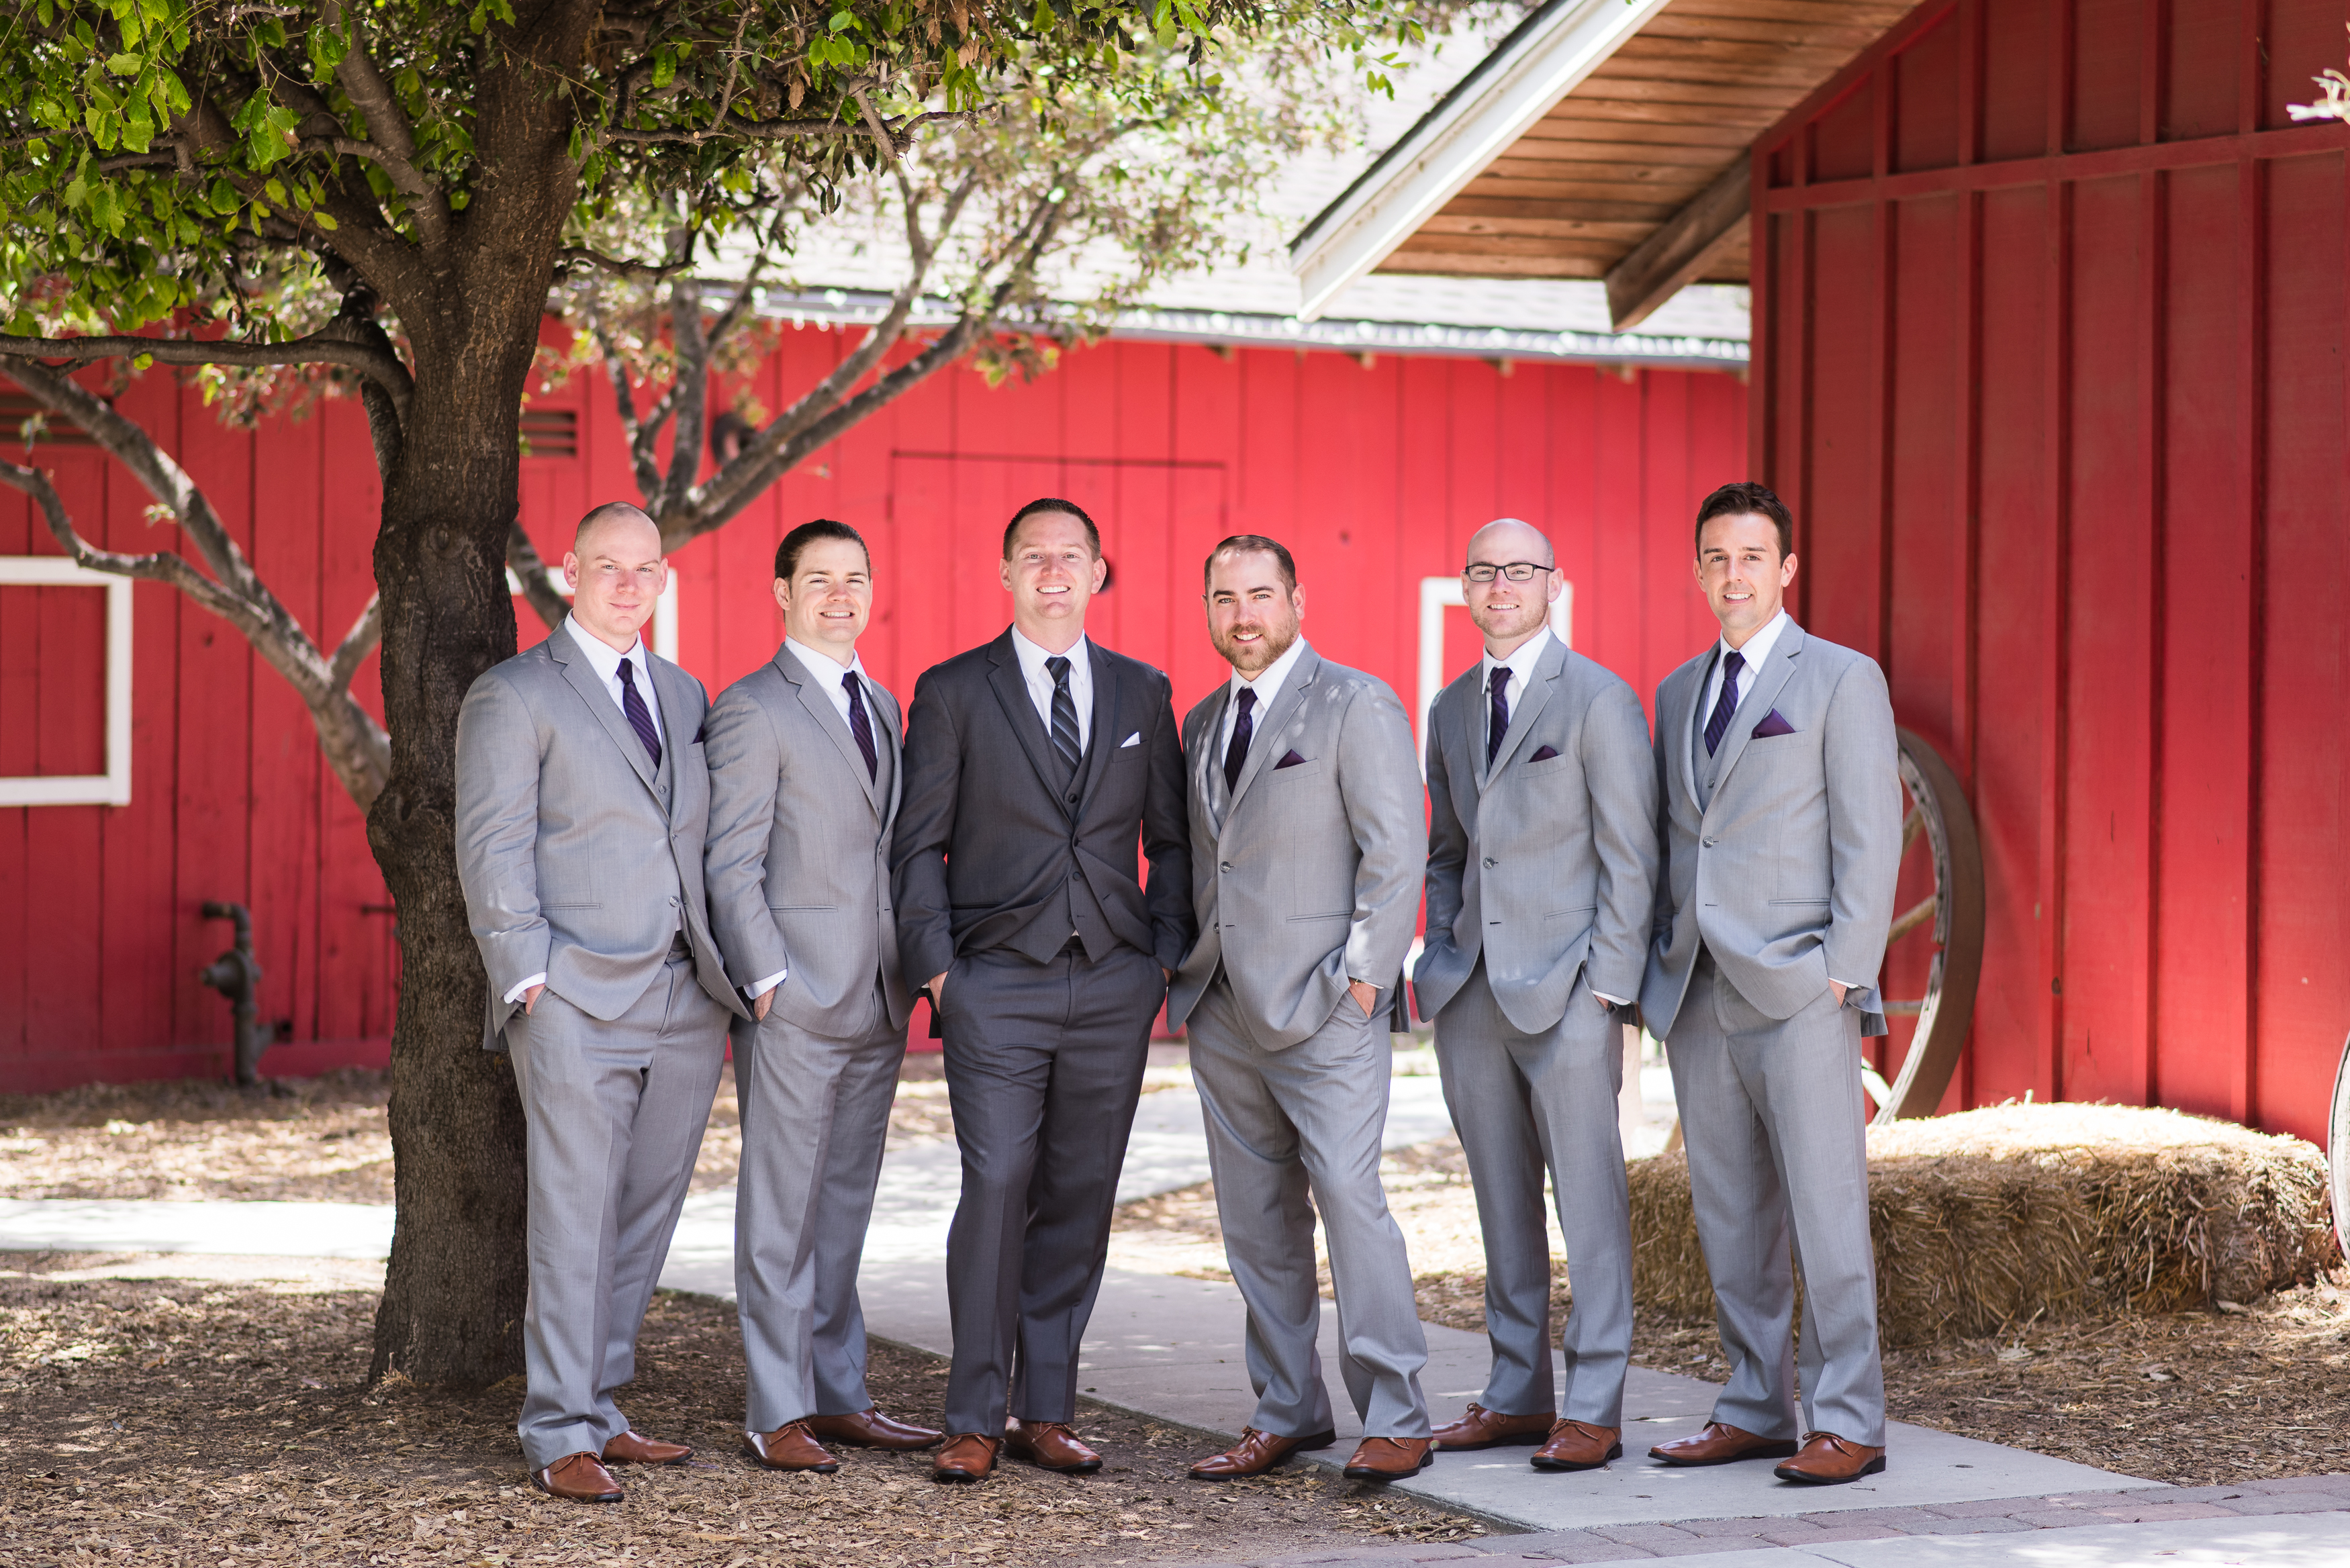 Groomsmen standing by red barn at Camarillo Ranch House